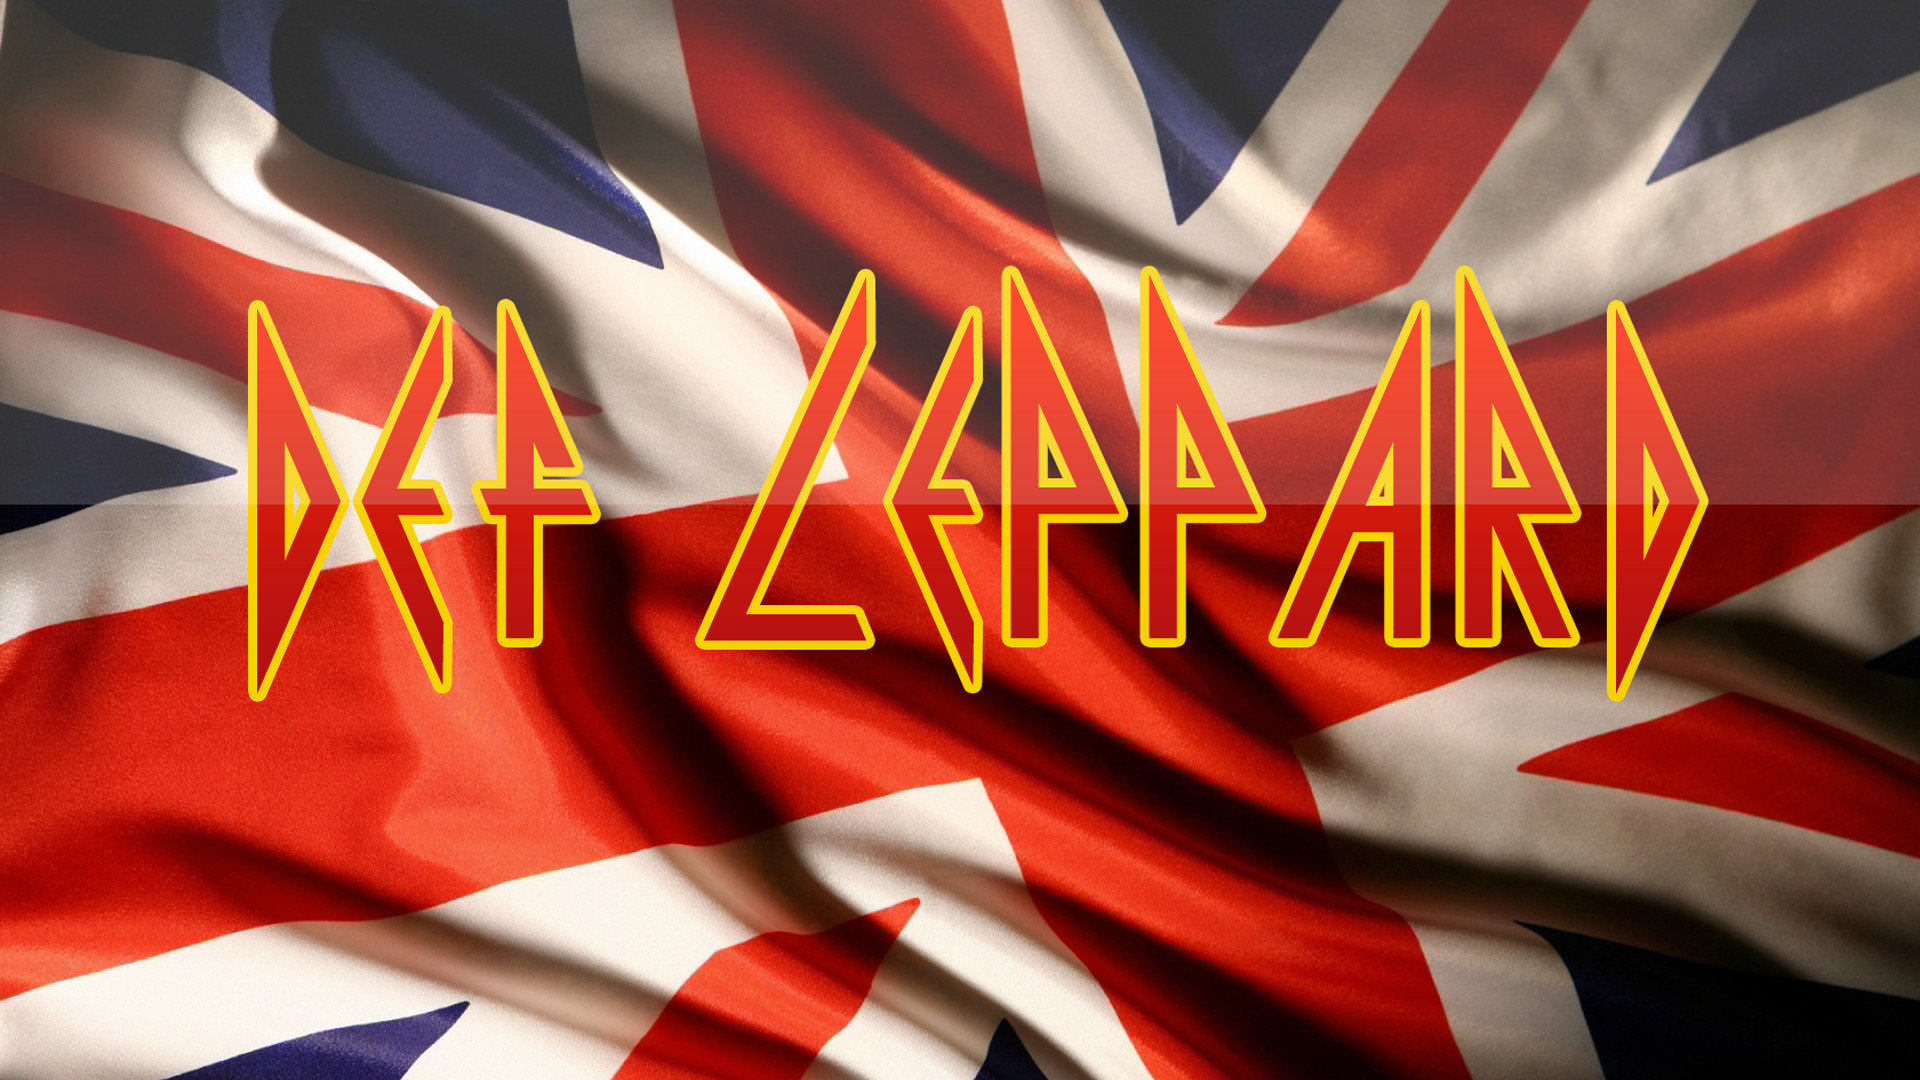 Download hd 1920x1080 Def Leppard computer background ID:122644 for free